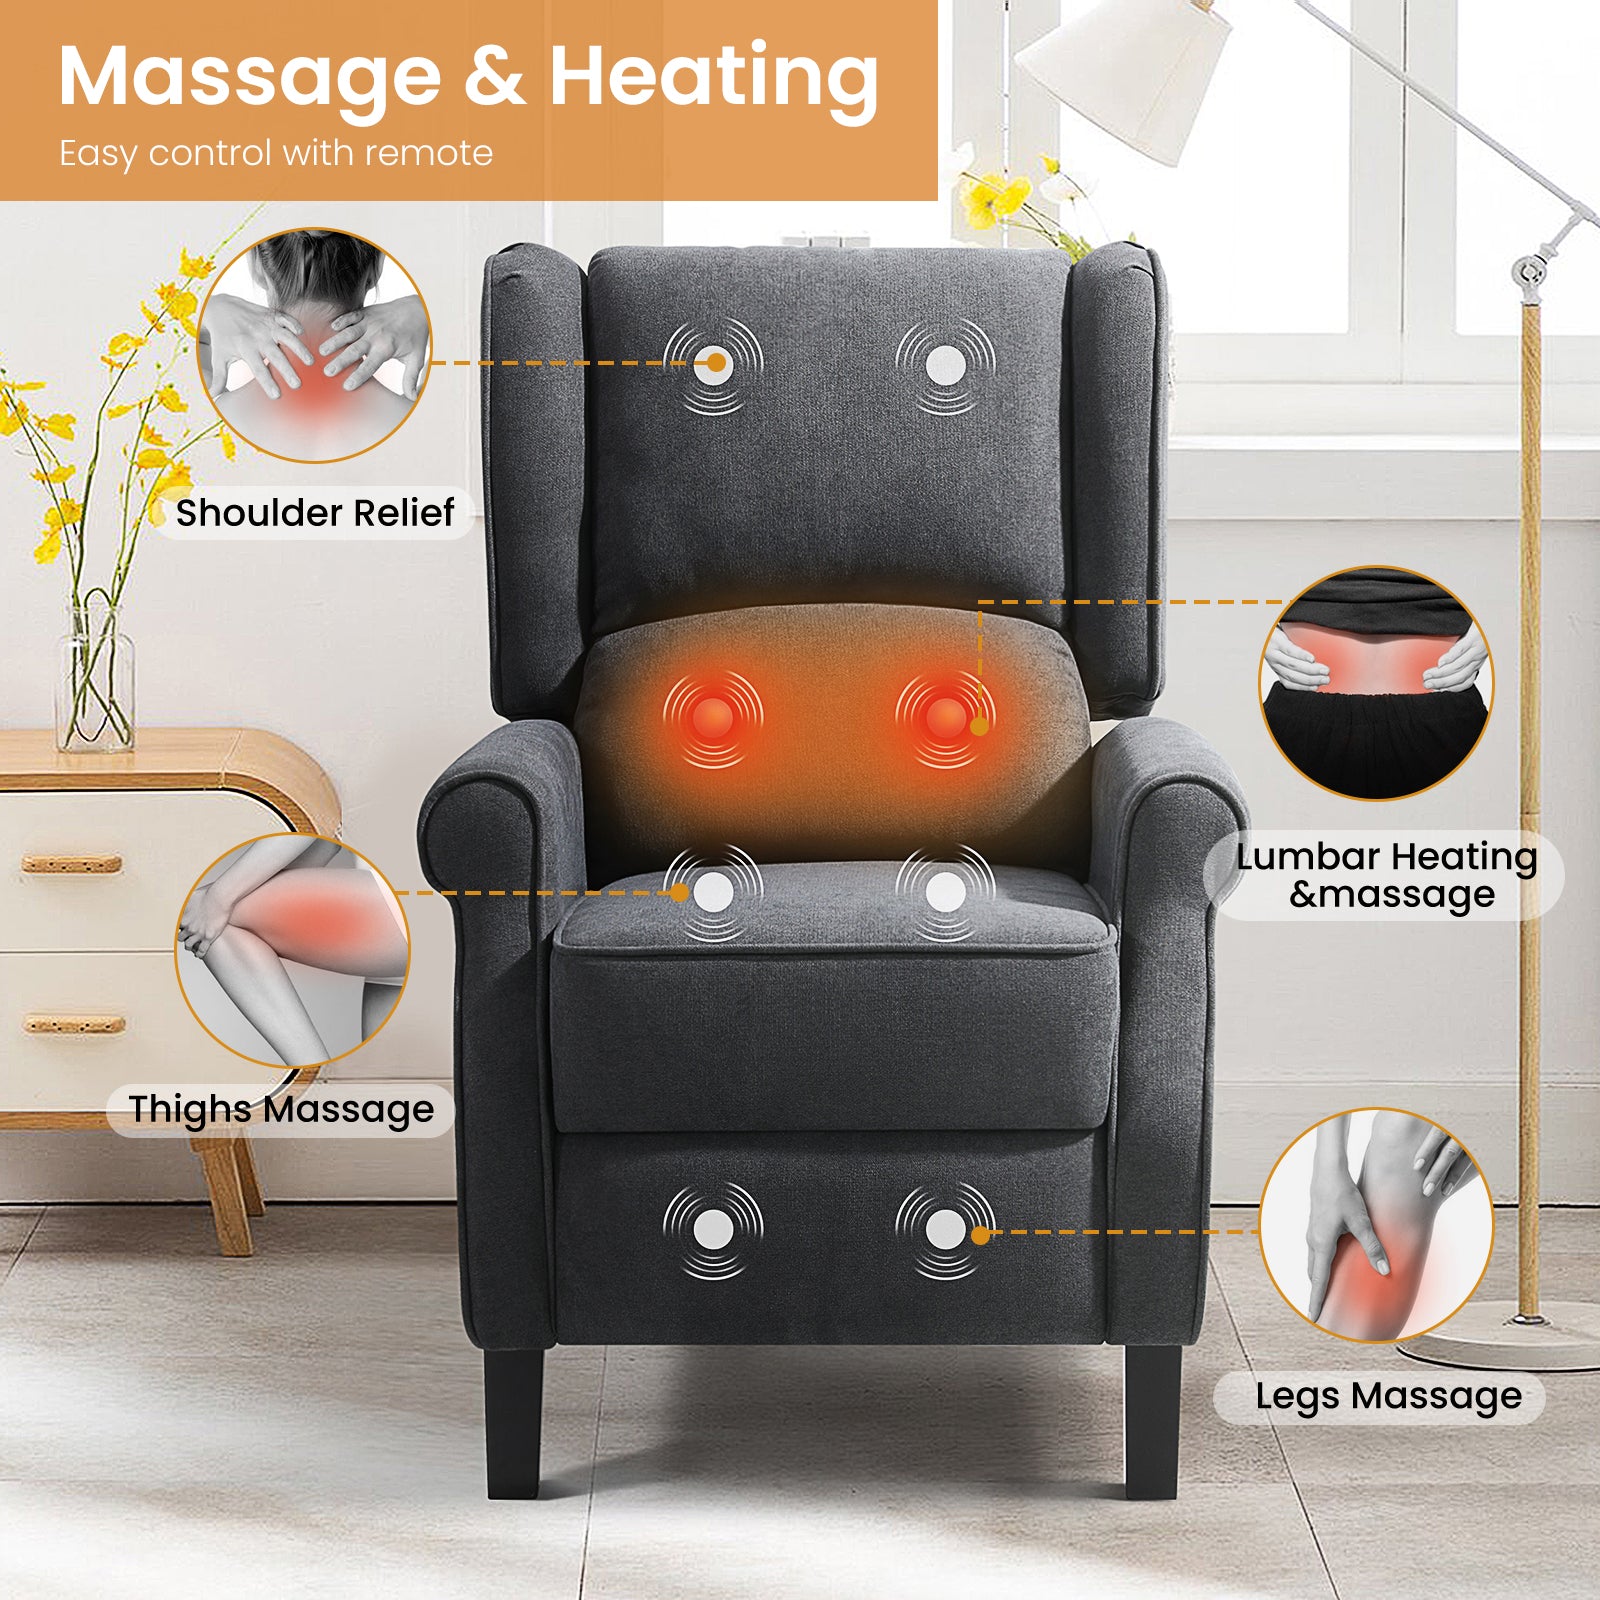 Heating in the massage chair